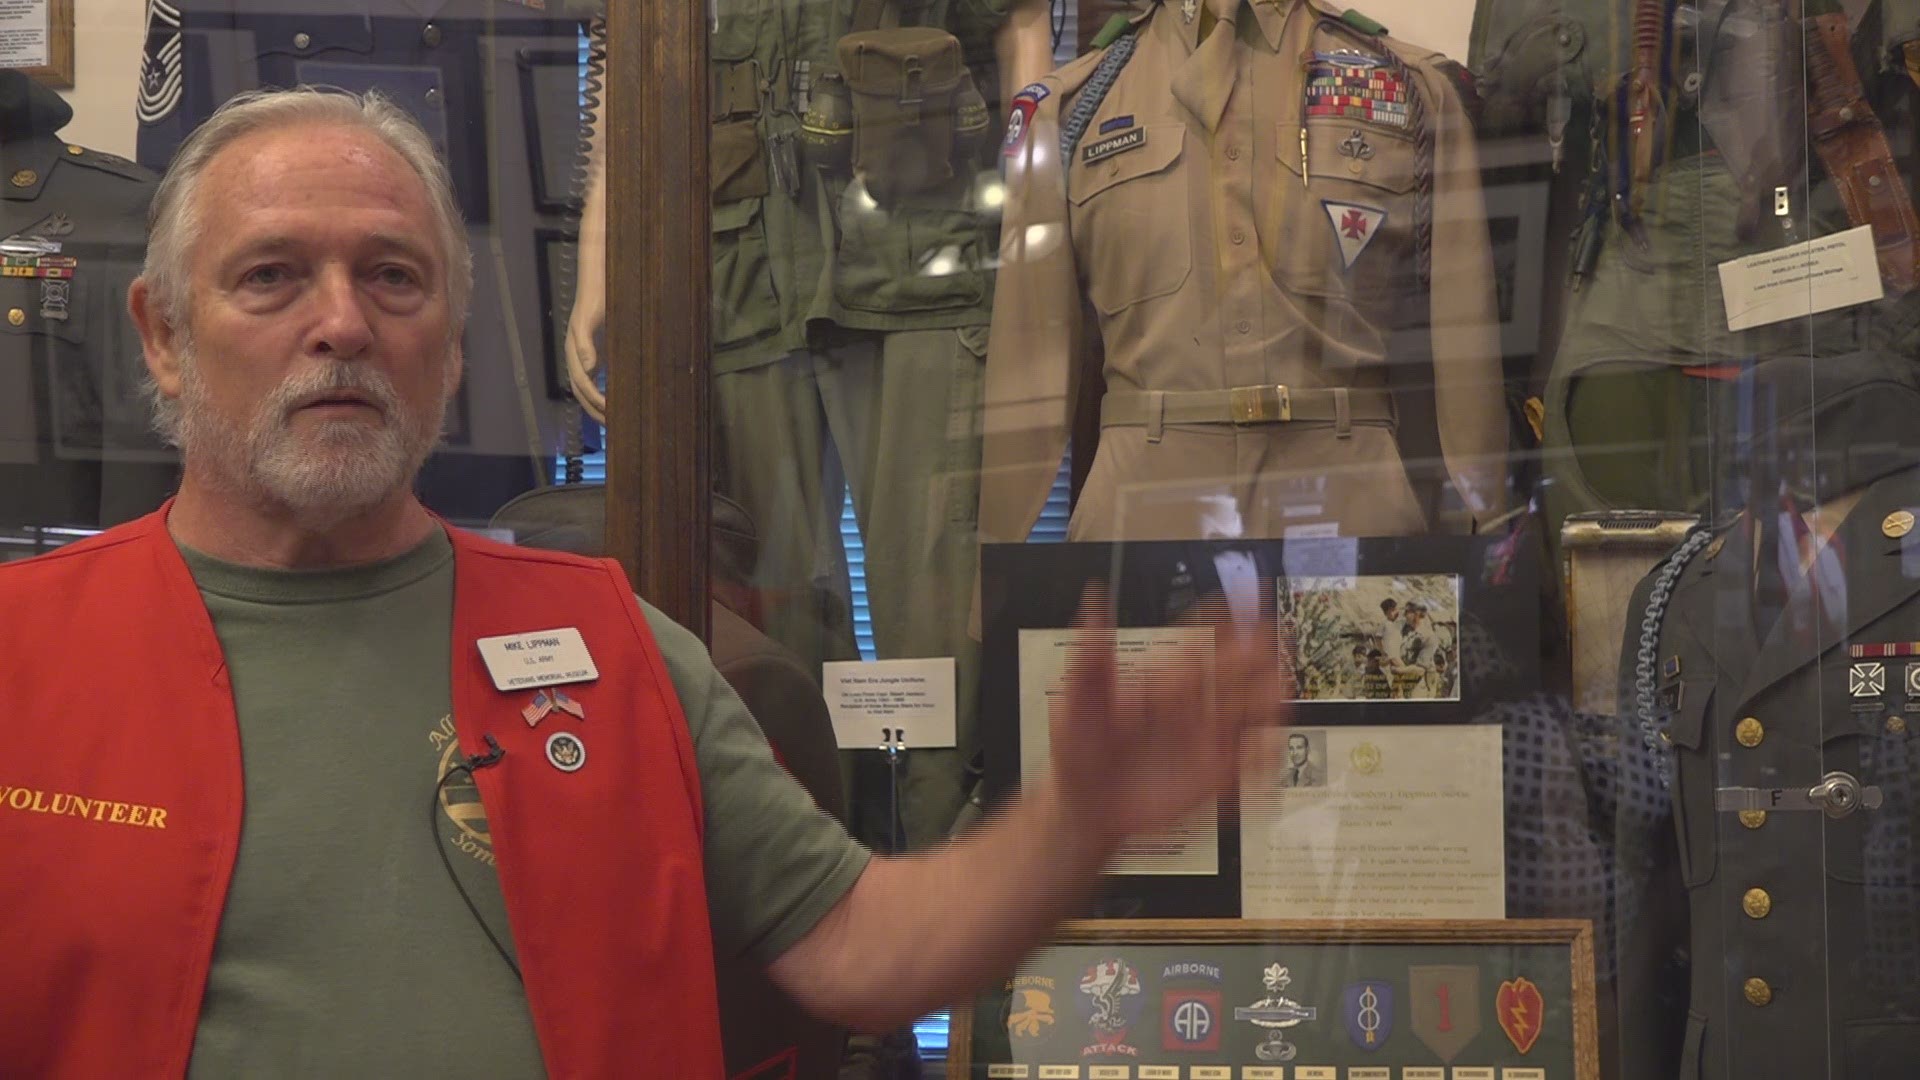 The Gwinnett County Veterans Museum is open all year, honoring soldiers and veterans every day.